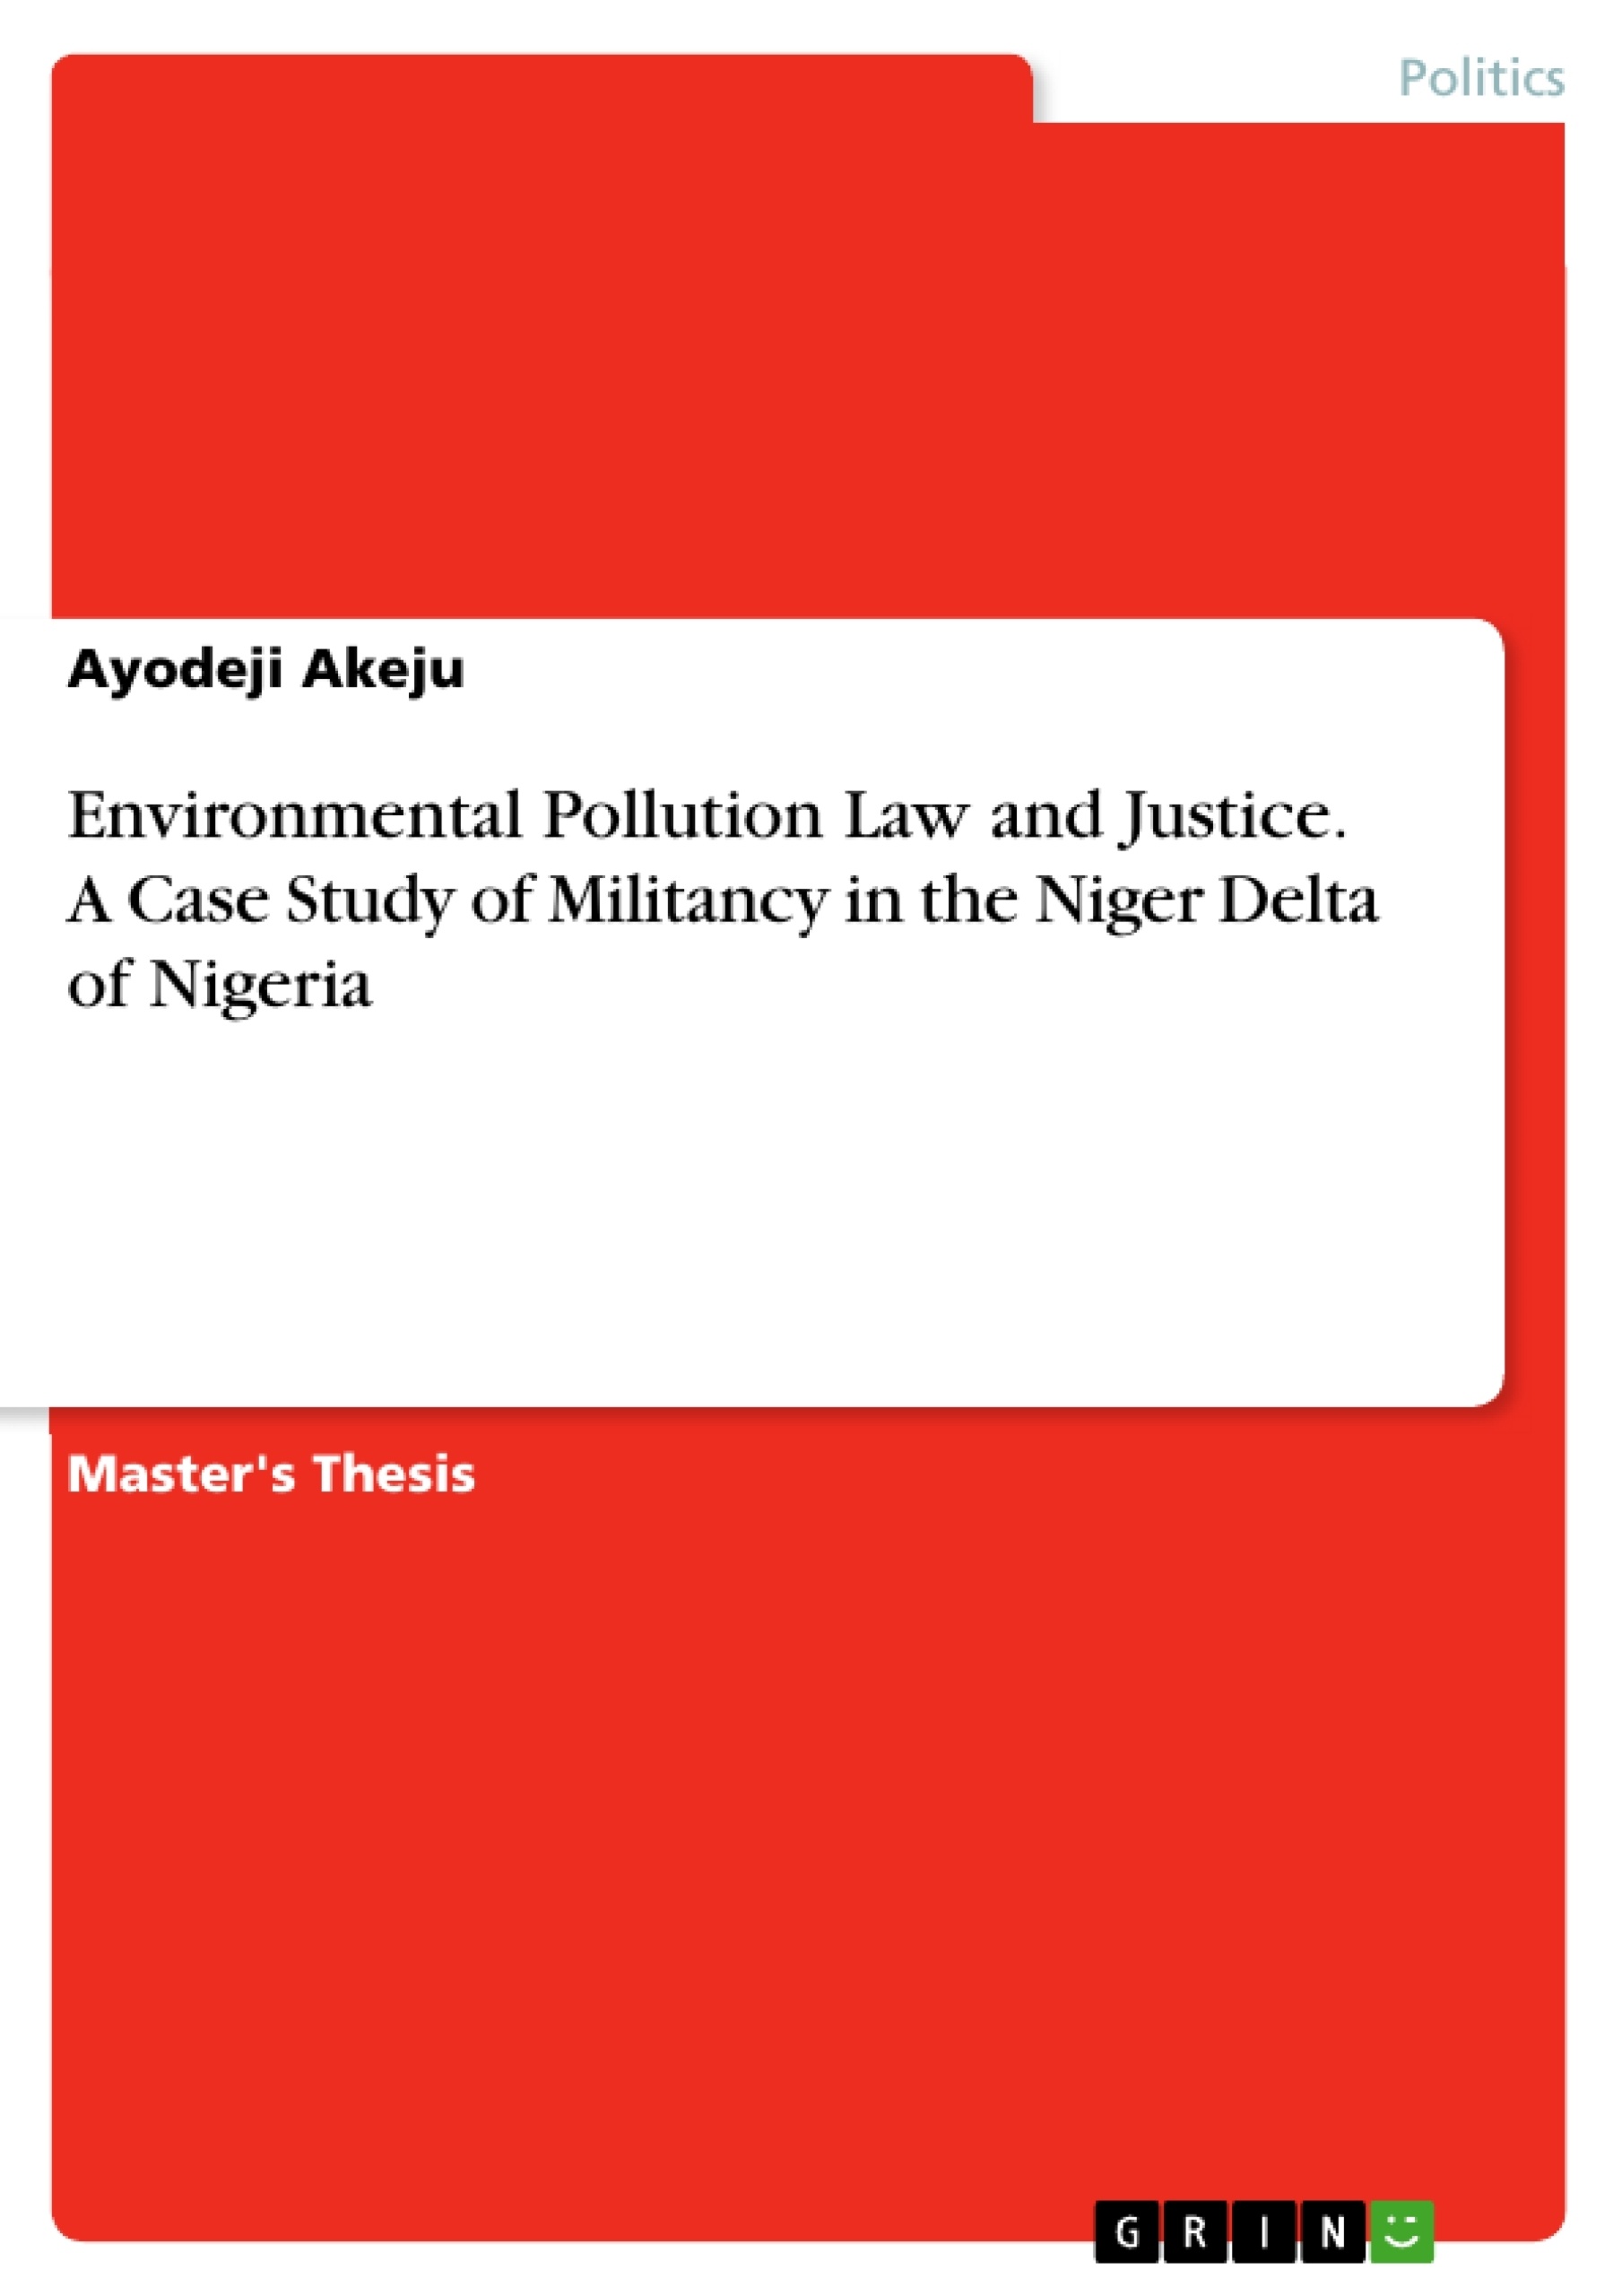 Title: Environmental Pollution Law and Justice. A Case Study of Militancy in the Niger Delta of Nigeria